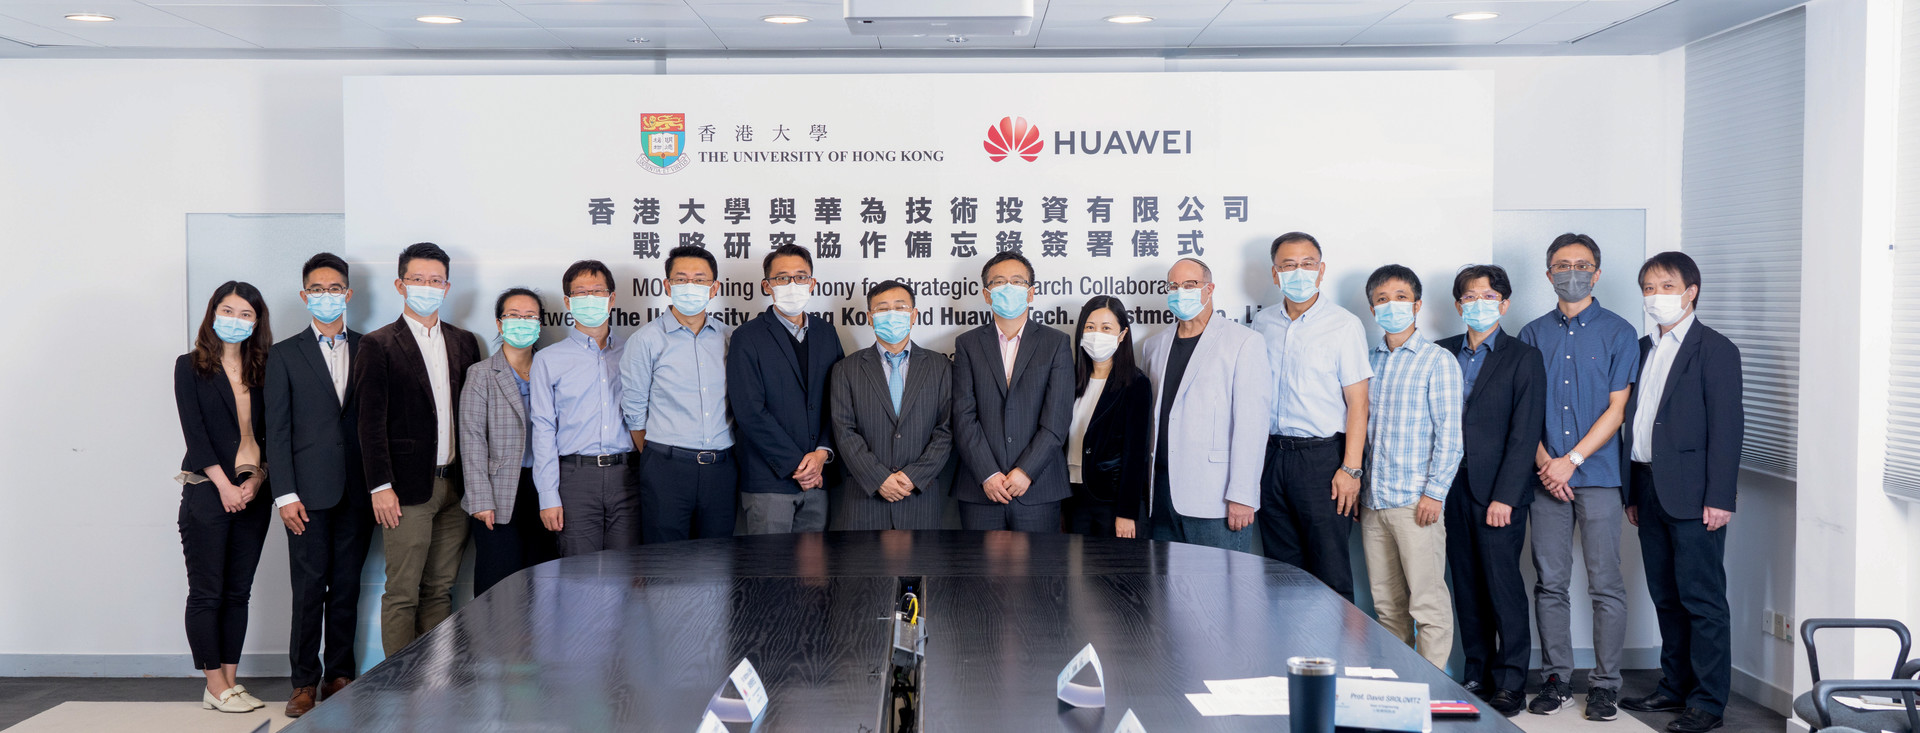 MOU Signing Ceremony between HKU and HUAWEI